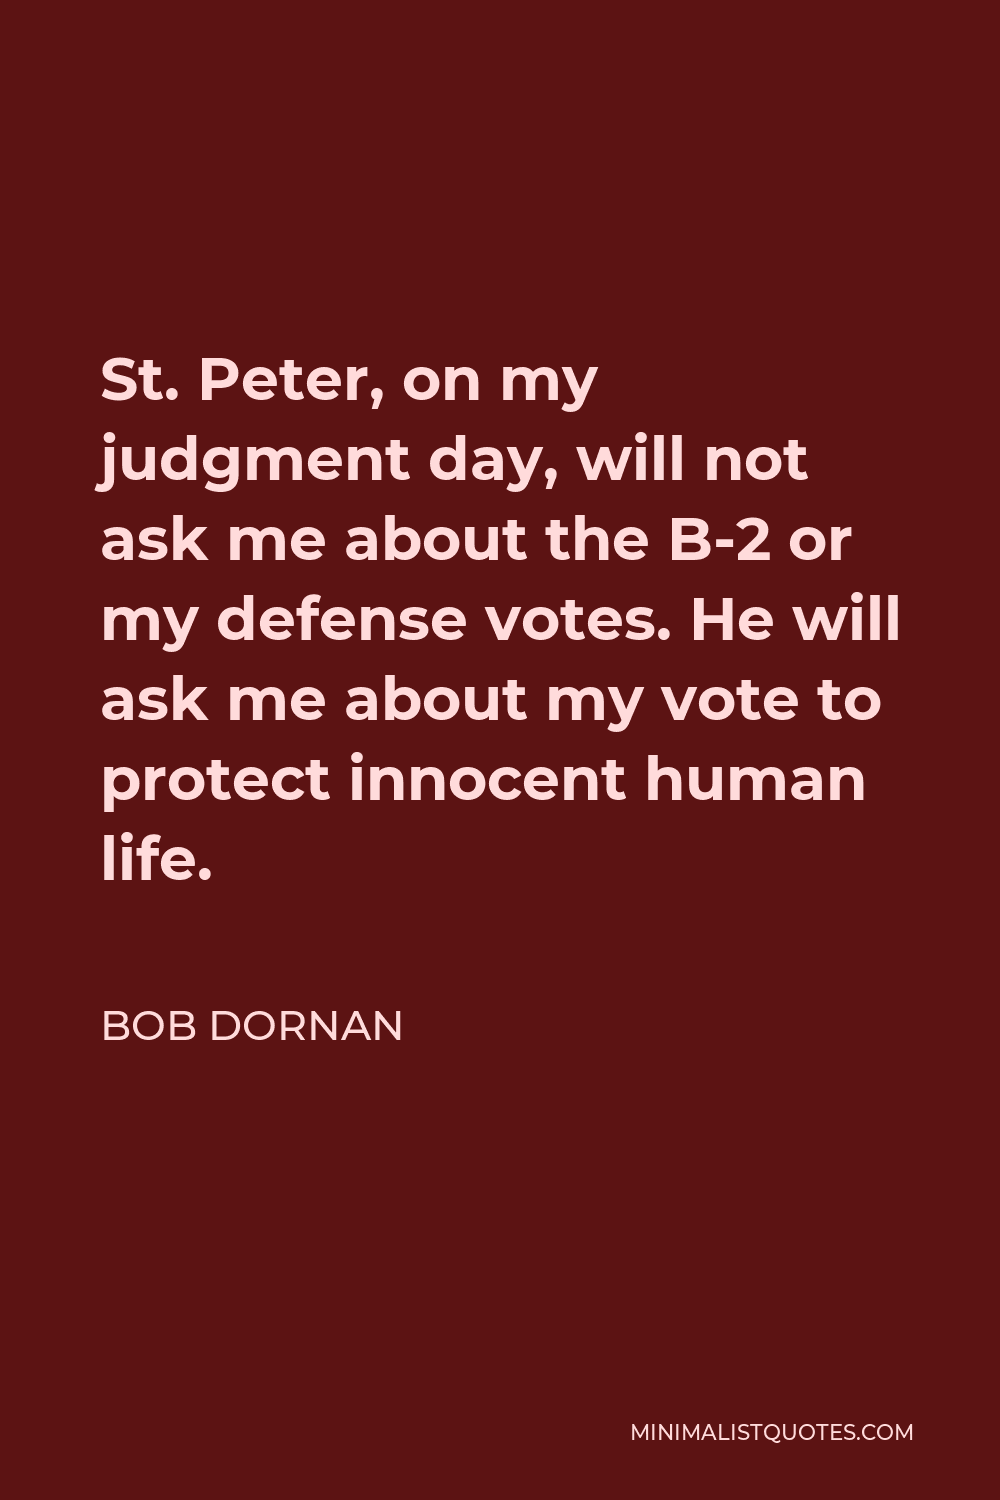 Bob Dornan Quote - St. Peter, on my judgment day, will not ask me about the B-2 or my defense votes. He will ask me about my vote to protect innocent human life.